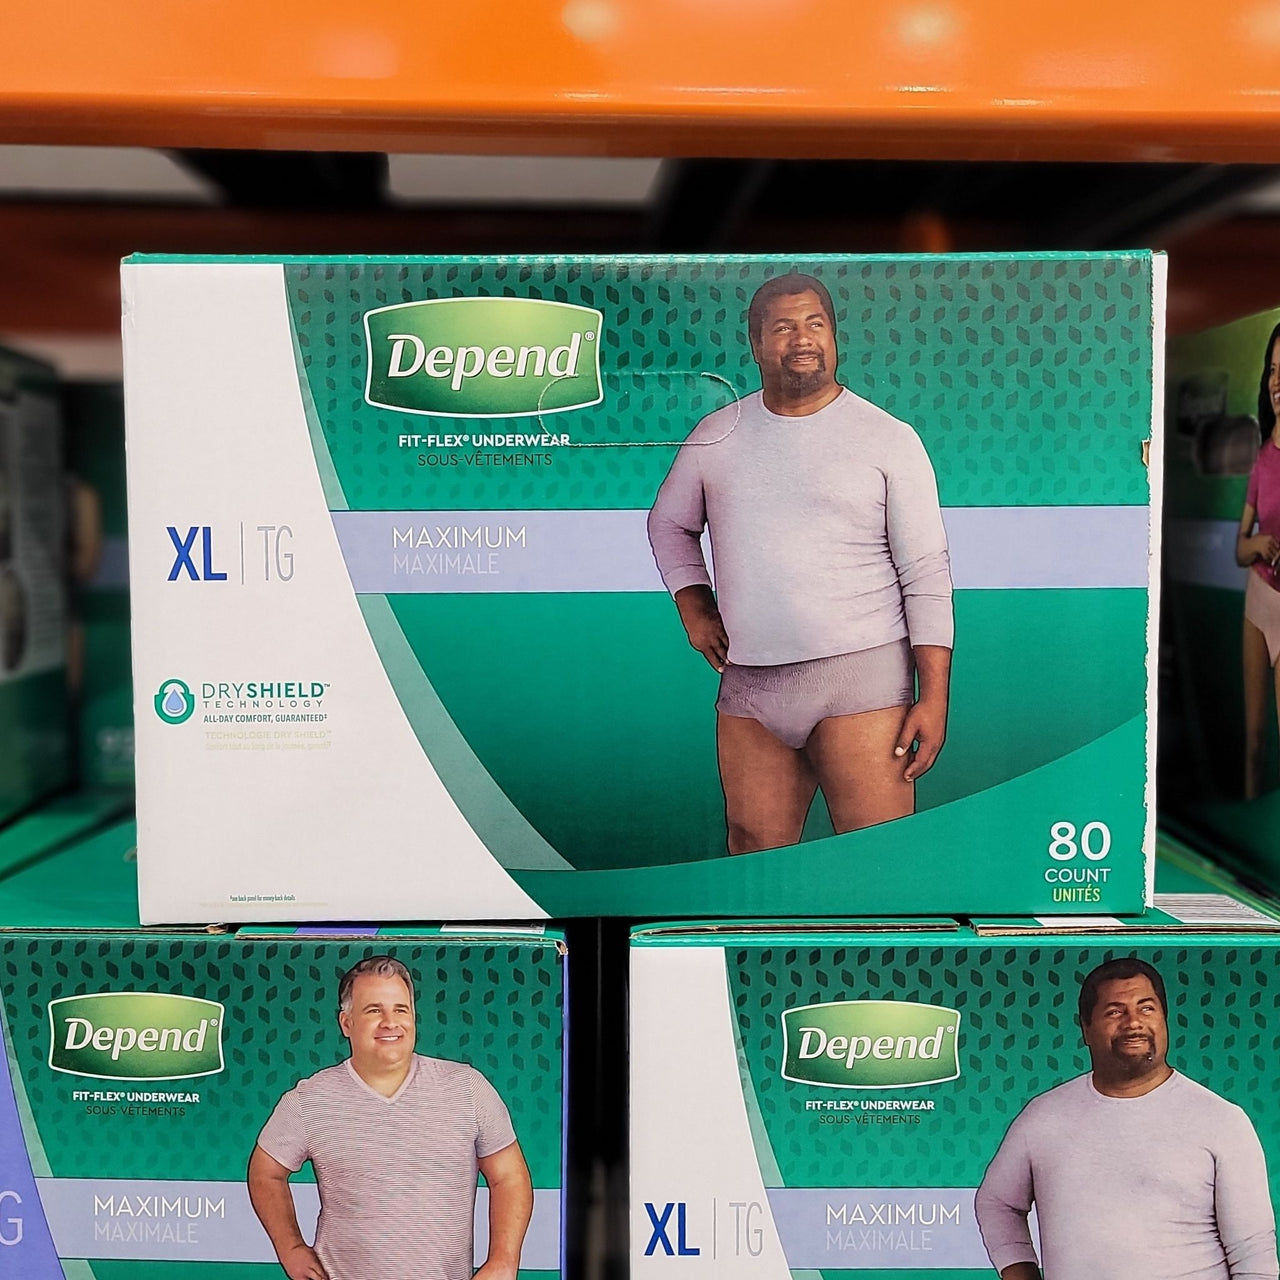 Depend Underwear For Men, Small-Medium, 92-pack Shipped to Nunavut – The  Northern Shopper